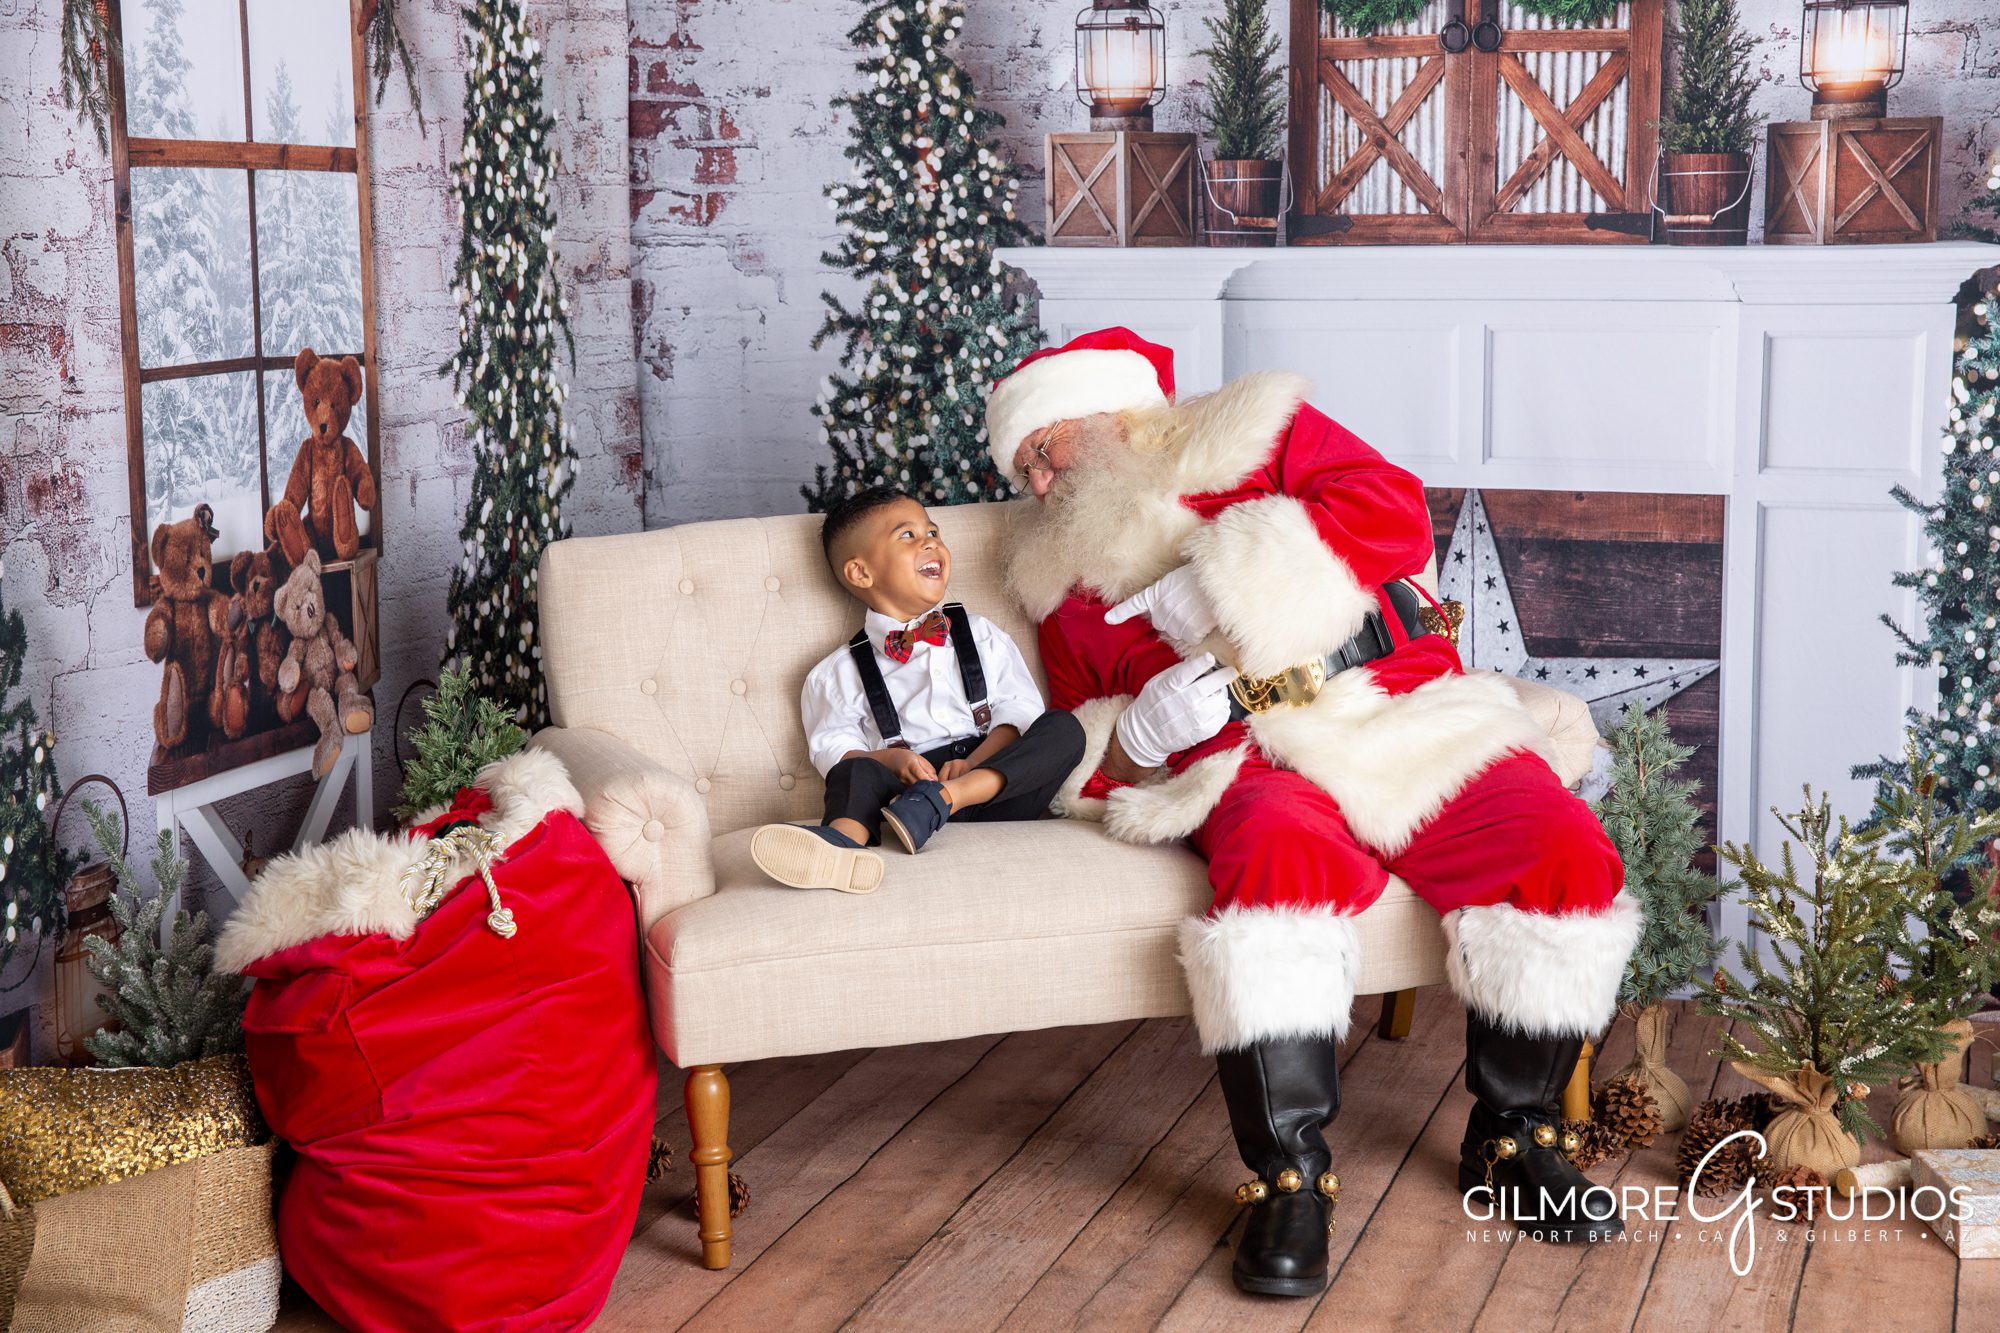 Santa Experience mini session - Gilbert, AZ - Newport Beach, CA - Christmas minis - Santa's Workshop - Santa Claus photography, Kids, children, Jolly, Ho, Ho, Ho, photo shoot, photographer, Gilmore Studios, Candy Cane Lane, Santa Claus, Christmas, Holiday, Winter Wonderland, Merry and Bright, Stockings, North Pole, Christmas Tree, Cookies and Milk, Red and White, Reindeer, Laughter, Naughty or Nice, Ornaments, Sleigh, Santa's Helpers, Santa Hat, Christmas Tree, Snowflakes, Sleigh Bells, Wreaths, Icicles, Twinkling Lights, Joy, Family, Presents, Festive Attire, Holly and Ivy